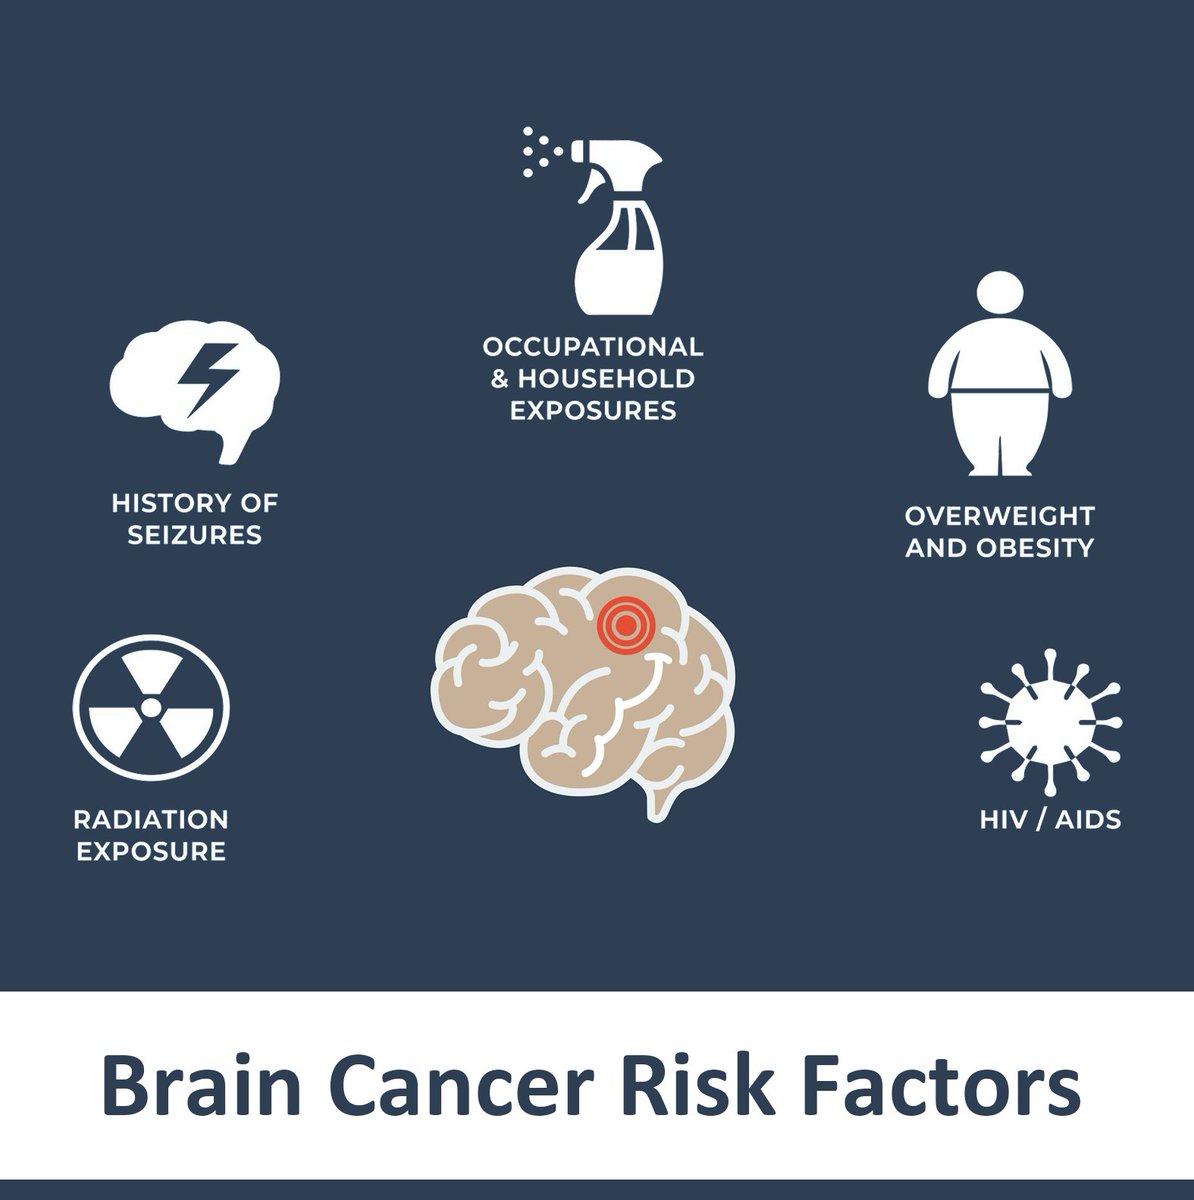 #BrainCancerAwareness Brain cancer risk factors include: 1. Age (both children & older adults) 2. Obesity 3. Exposure to radiation 4. Family history: inherited syndromes 5. Weakened immune system Stay informed, stay aware.